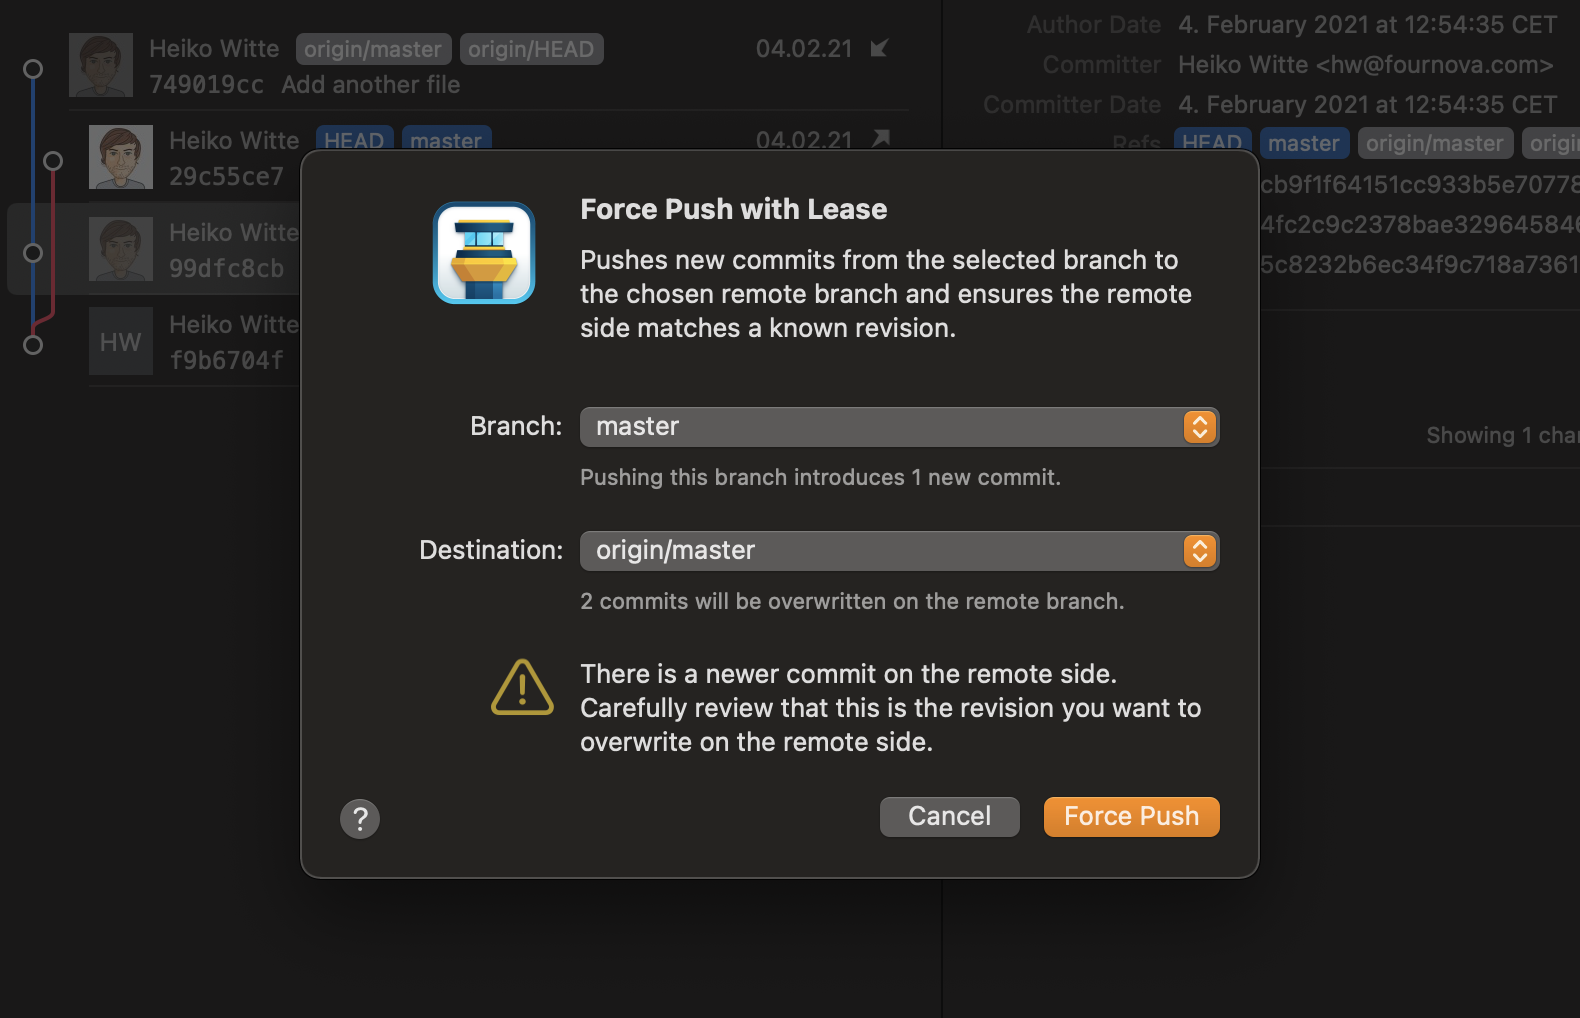 Tower — Force Push with Lease